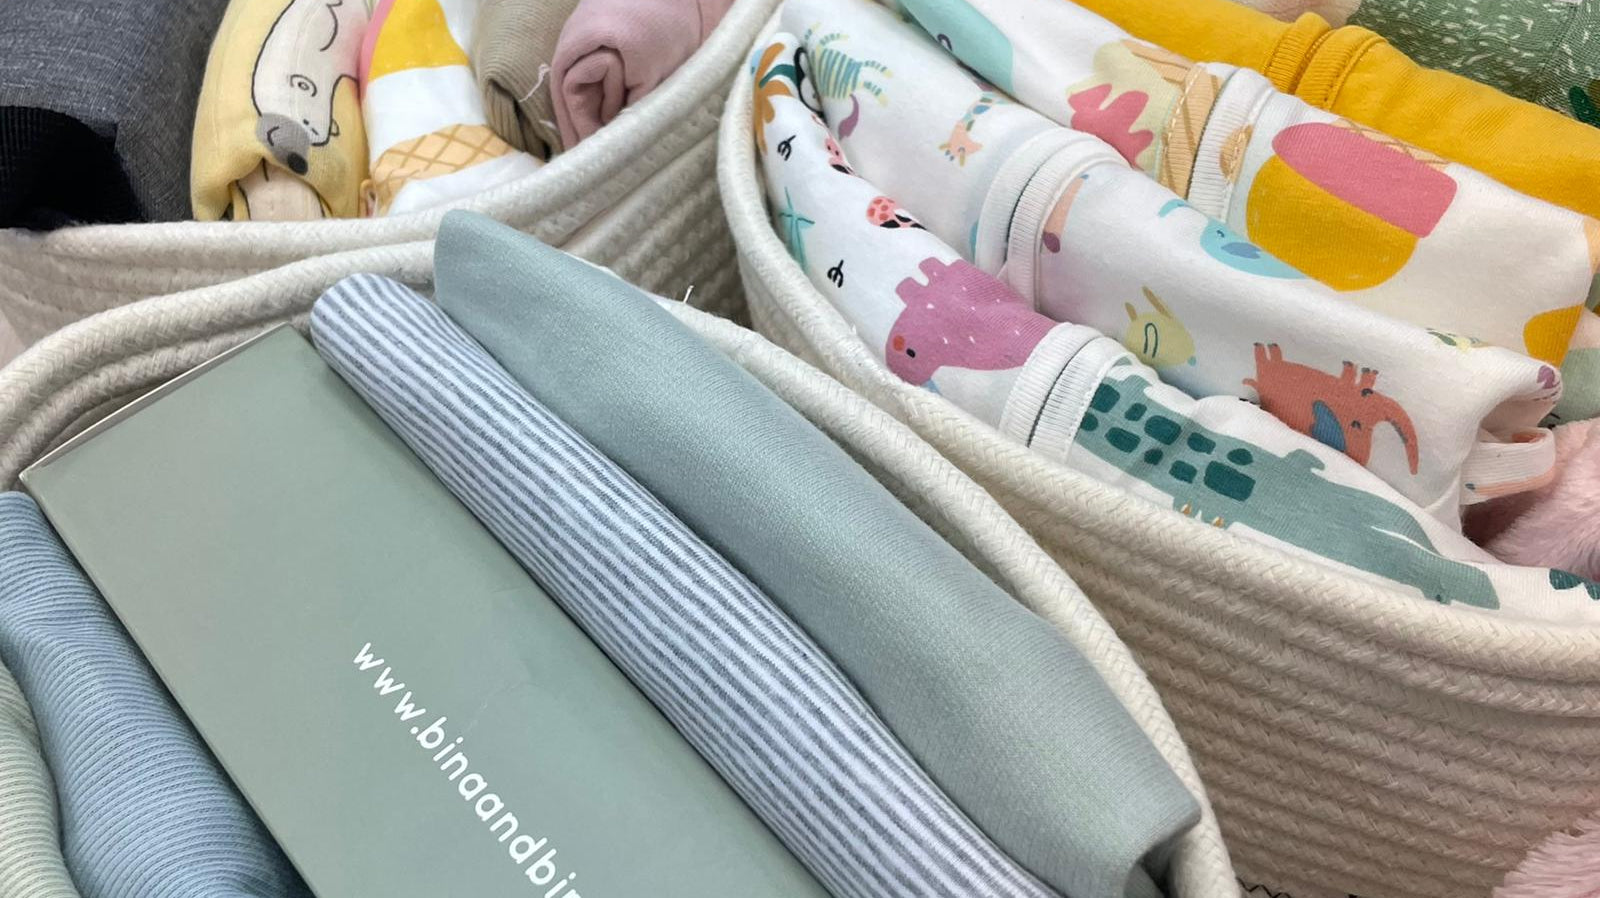 5 Beautiful and Practical Newborn Baby Gifts That New Parents Will Love